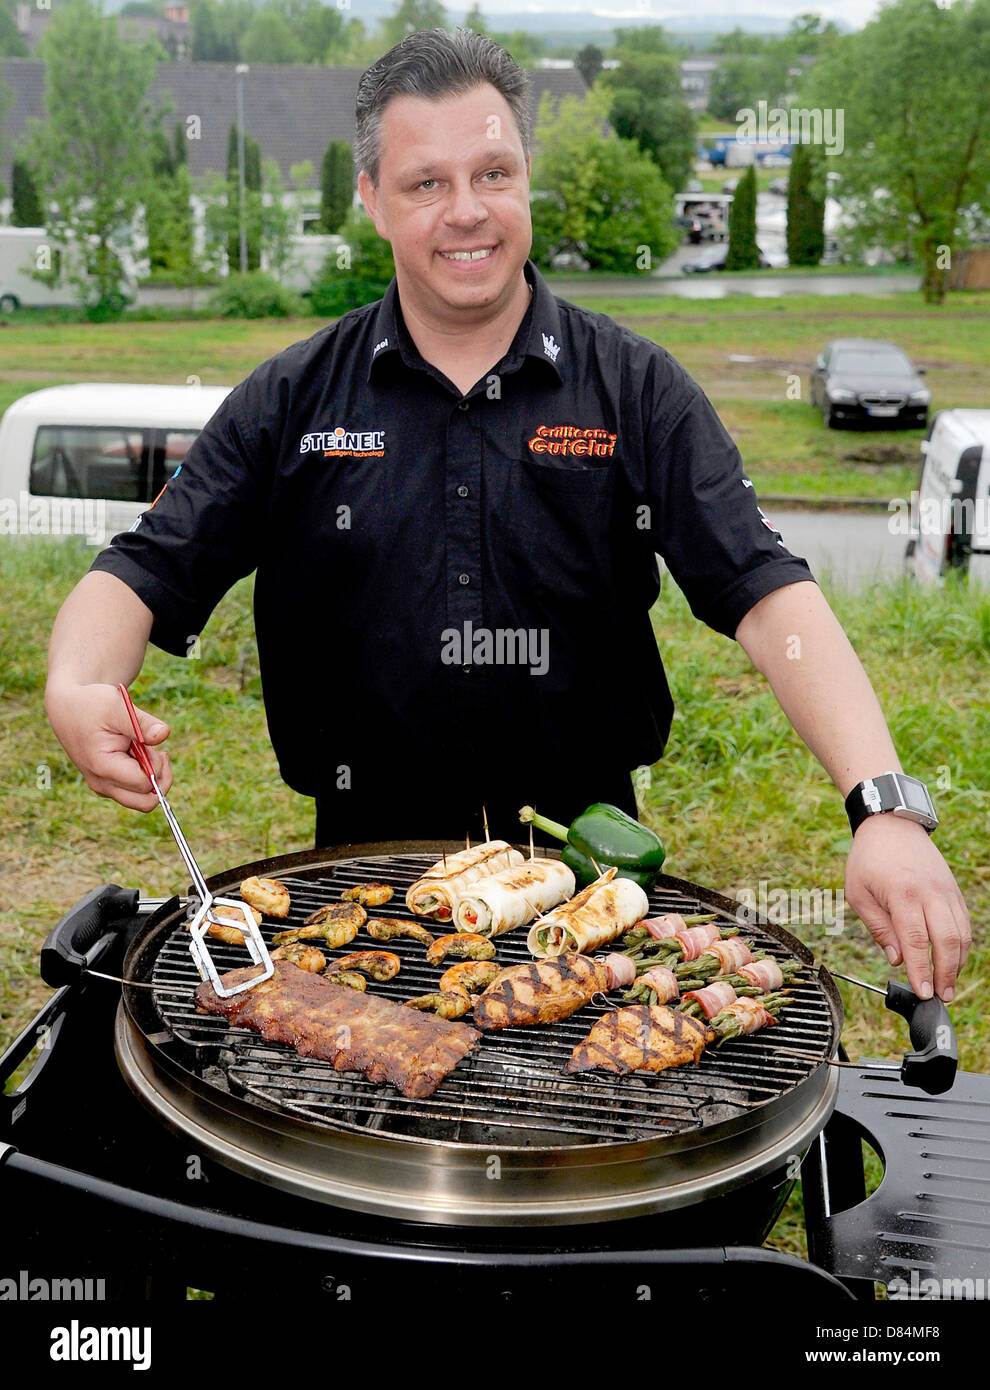 Michael Hoffmann, team boss of Grillteam Gut Glut e.V., presents meat on his grill during the 18th German grill championship in Goeppingen, Germany, 19 May 2013. Hoffman succeeds in defending his championship title from former year, among 32 other teams. PHOTO: DANIEL MAURER Stock Photo